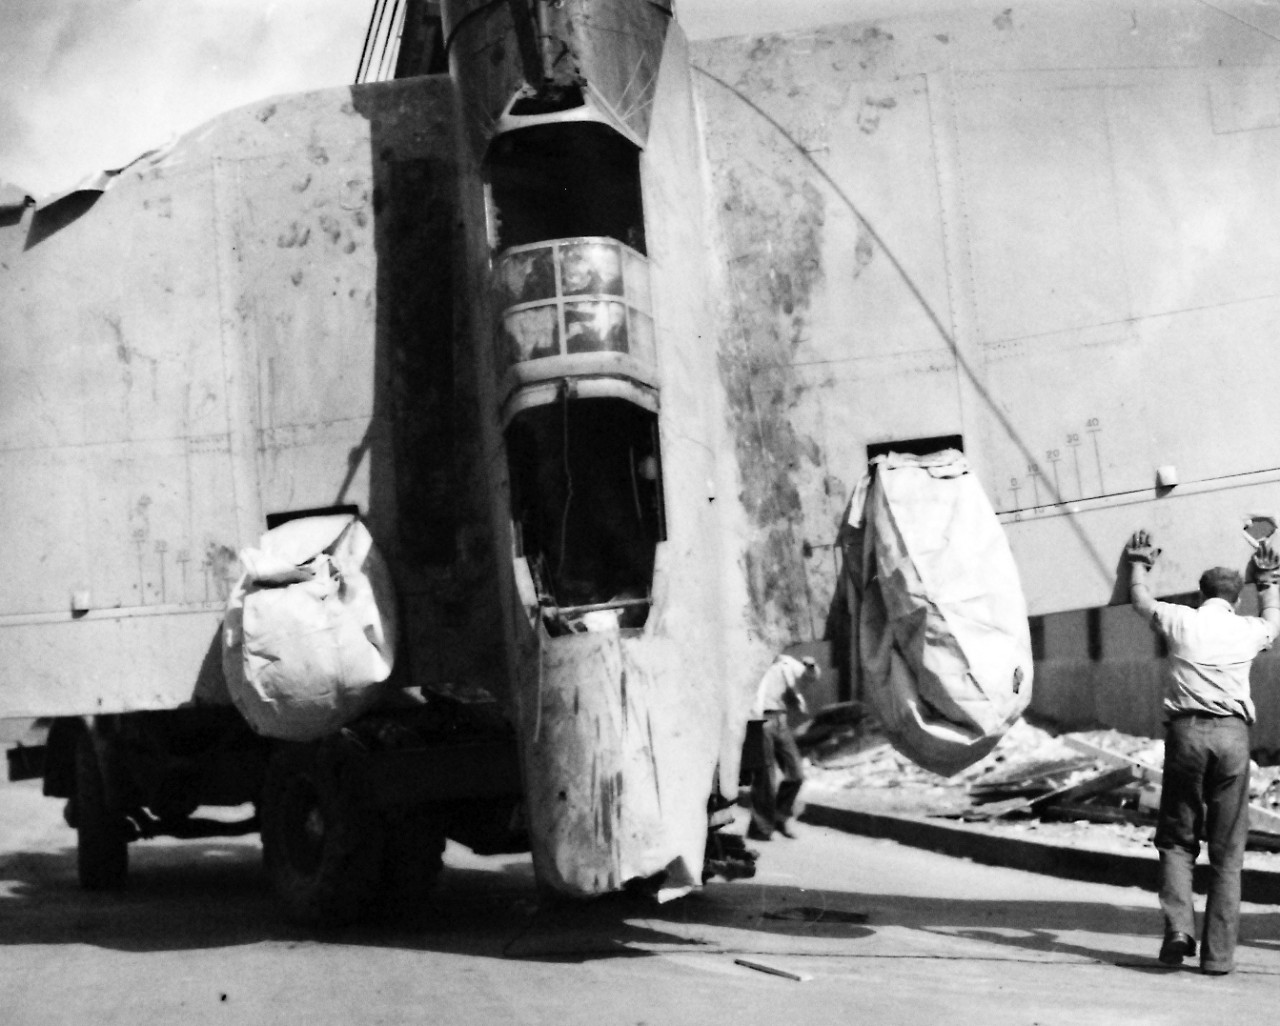 80-G-33014:   Japanese Attack on Pearl Harbor Attack, 7 December 1941.    Japanese Navy Type 99 Carrier Bomber, an Aichi D3A “VAL”,  shot down during the attack.   U.S. Navy photograph, now in the collections of the National Archives.  (9/13/2013).